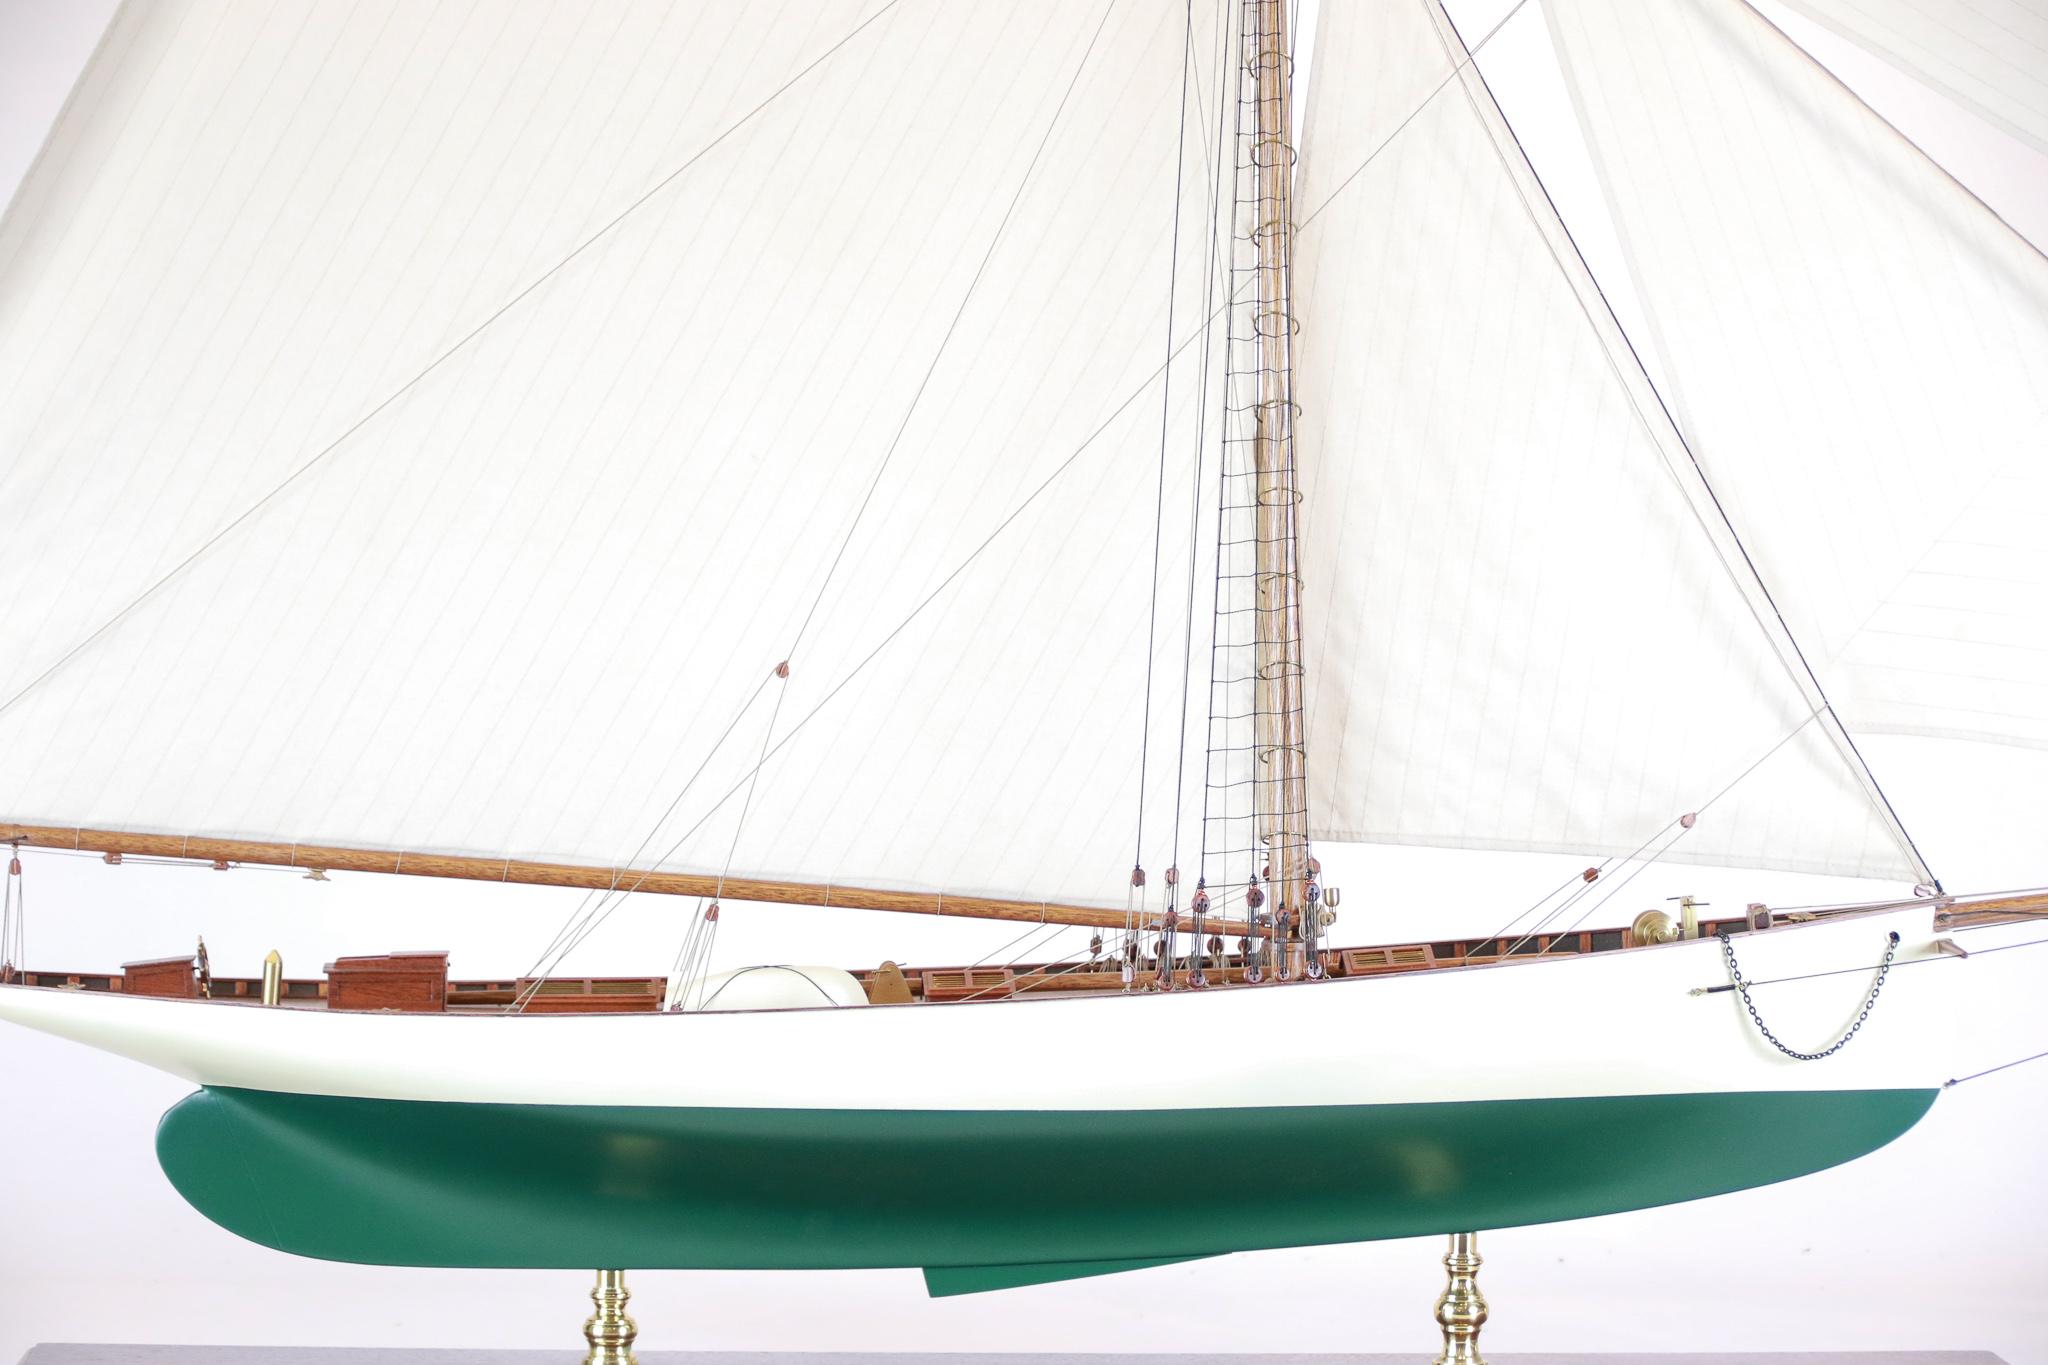 Early America's Cup model of the Puritan of 1885. The Puritan was designed by Edward Burgess and built at the Lawley boat yard in Boston. Puritan was owned by John Malcolm Forbes, the yacht he skipped when she beat British yacht Genesta for the